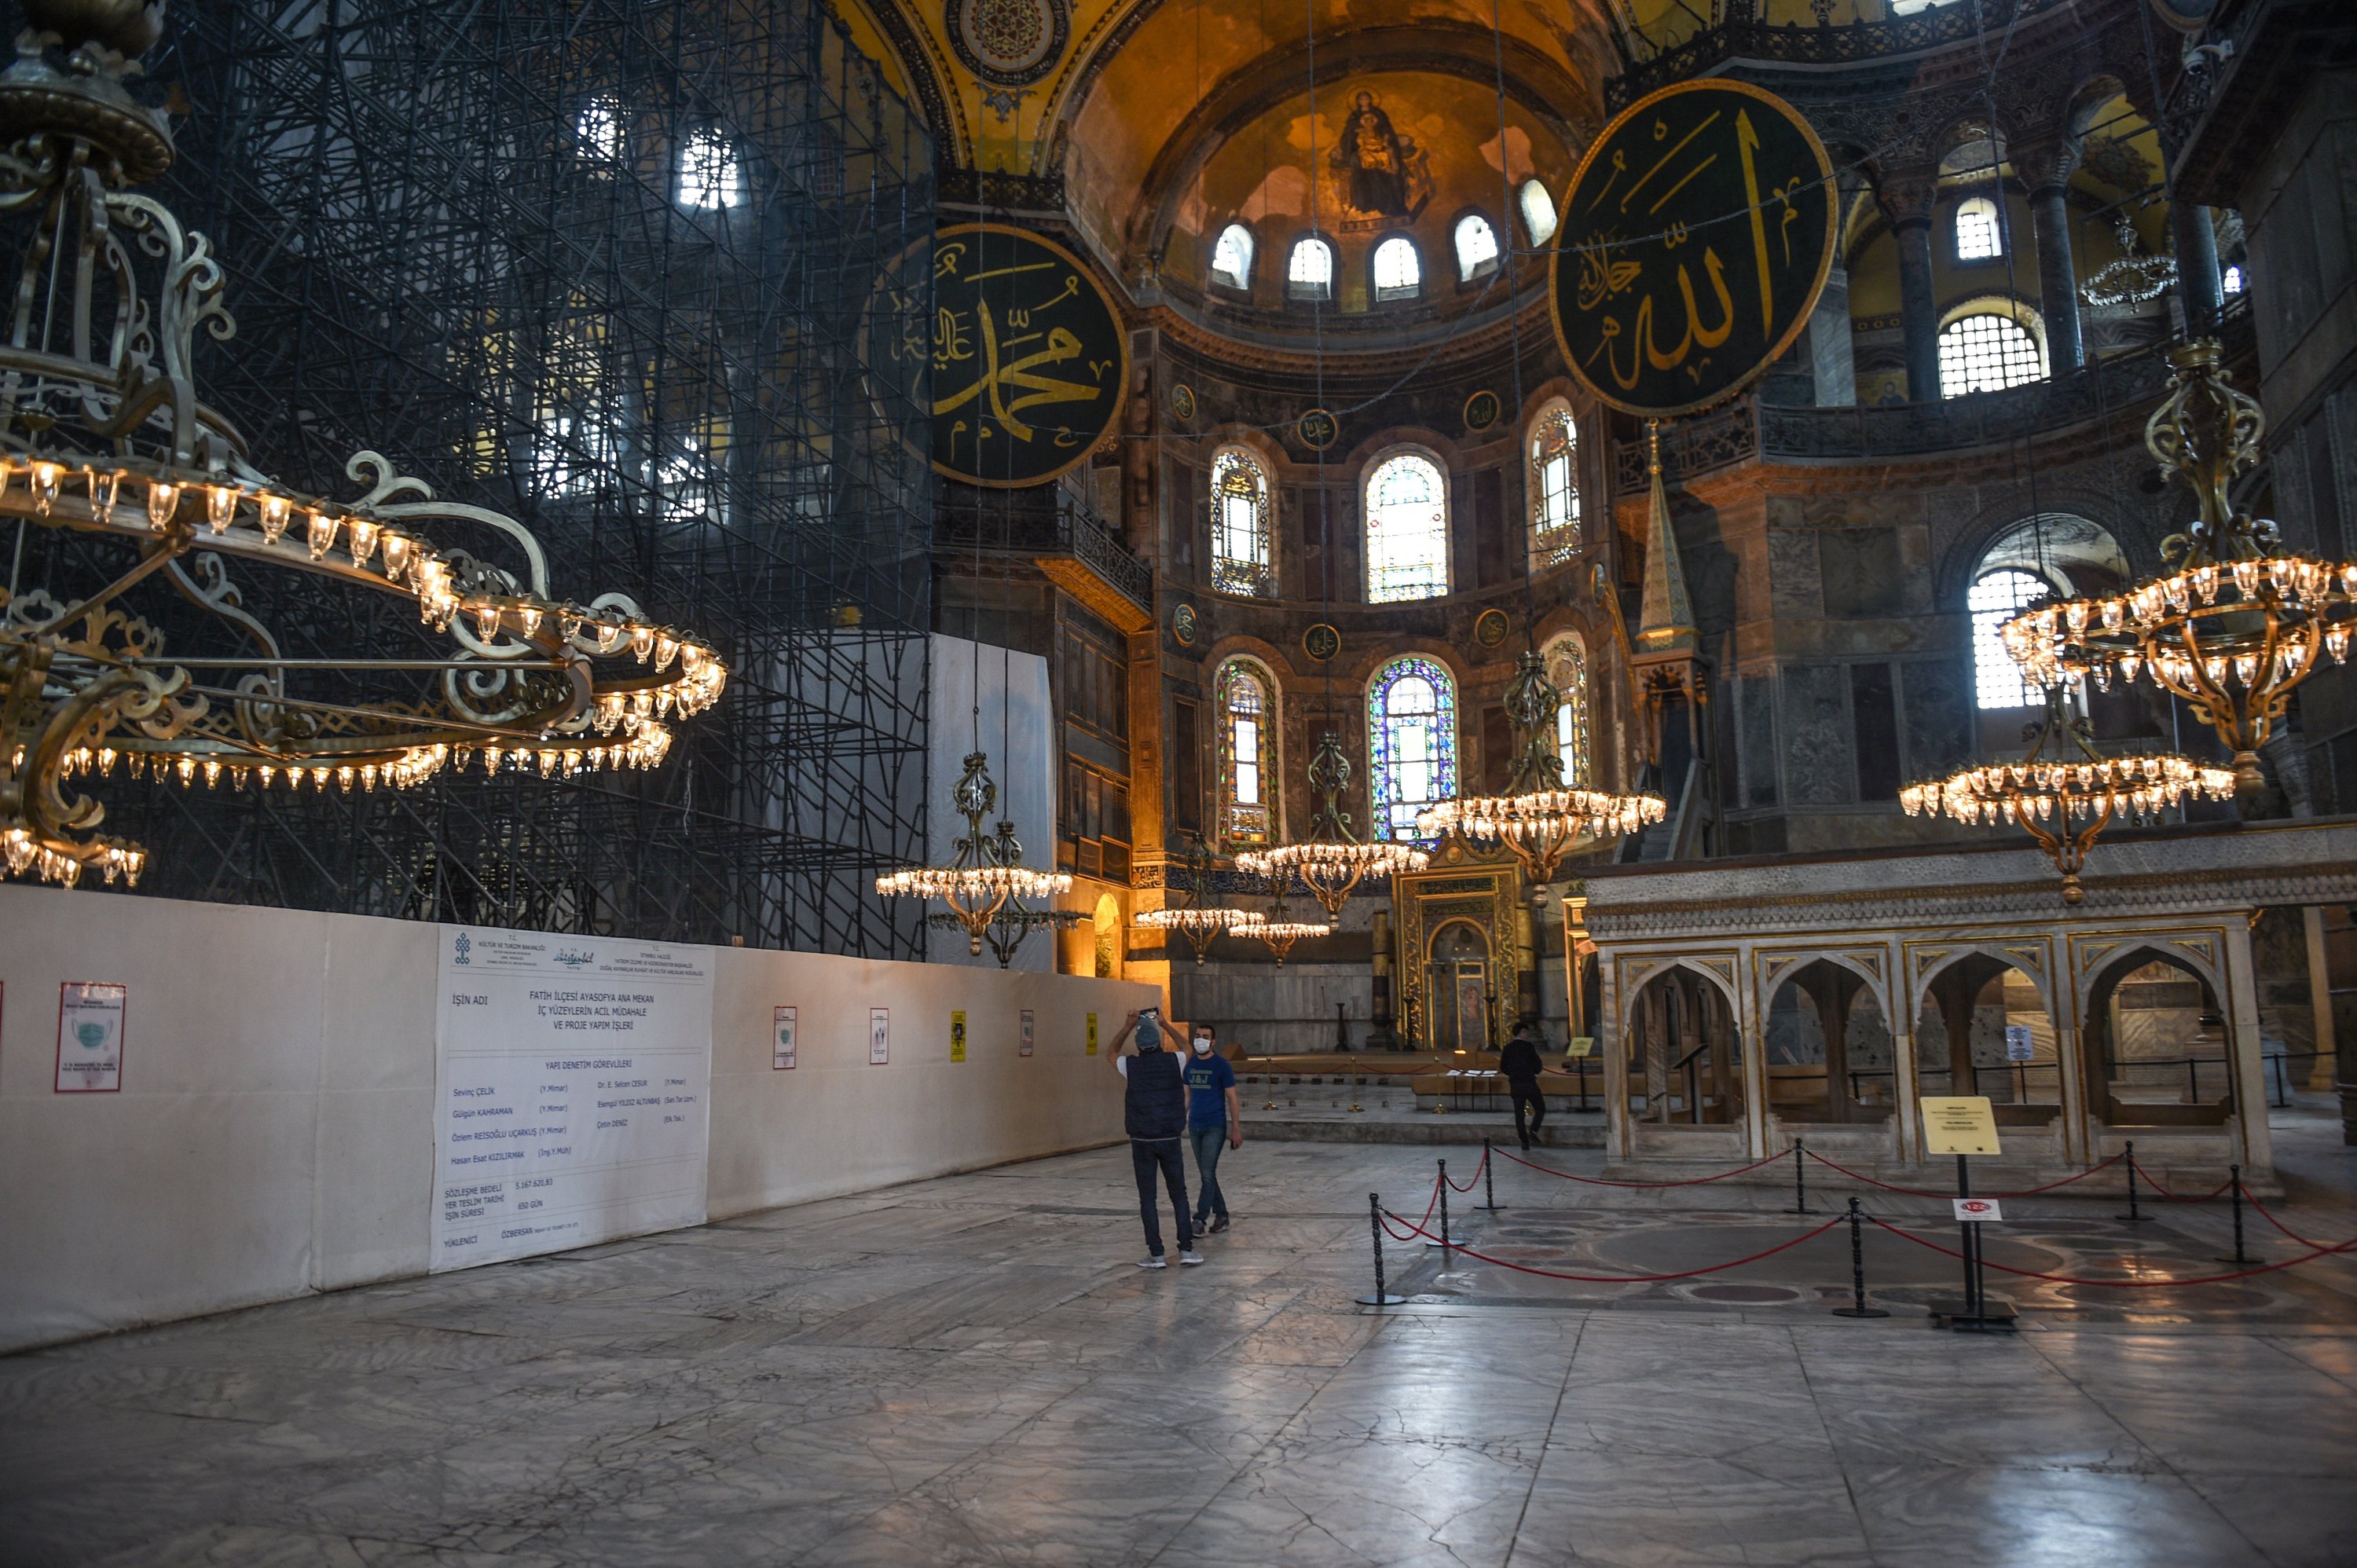 A photo shows the interior of Hagia Sophia, in Istanbul, Turkey, June 3, 2020. (PHOTO BY İLHAMİ YILDIRIM)